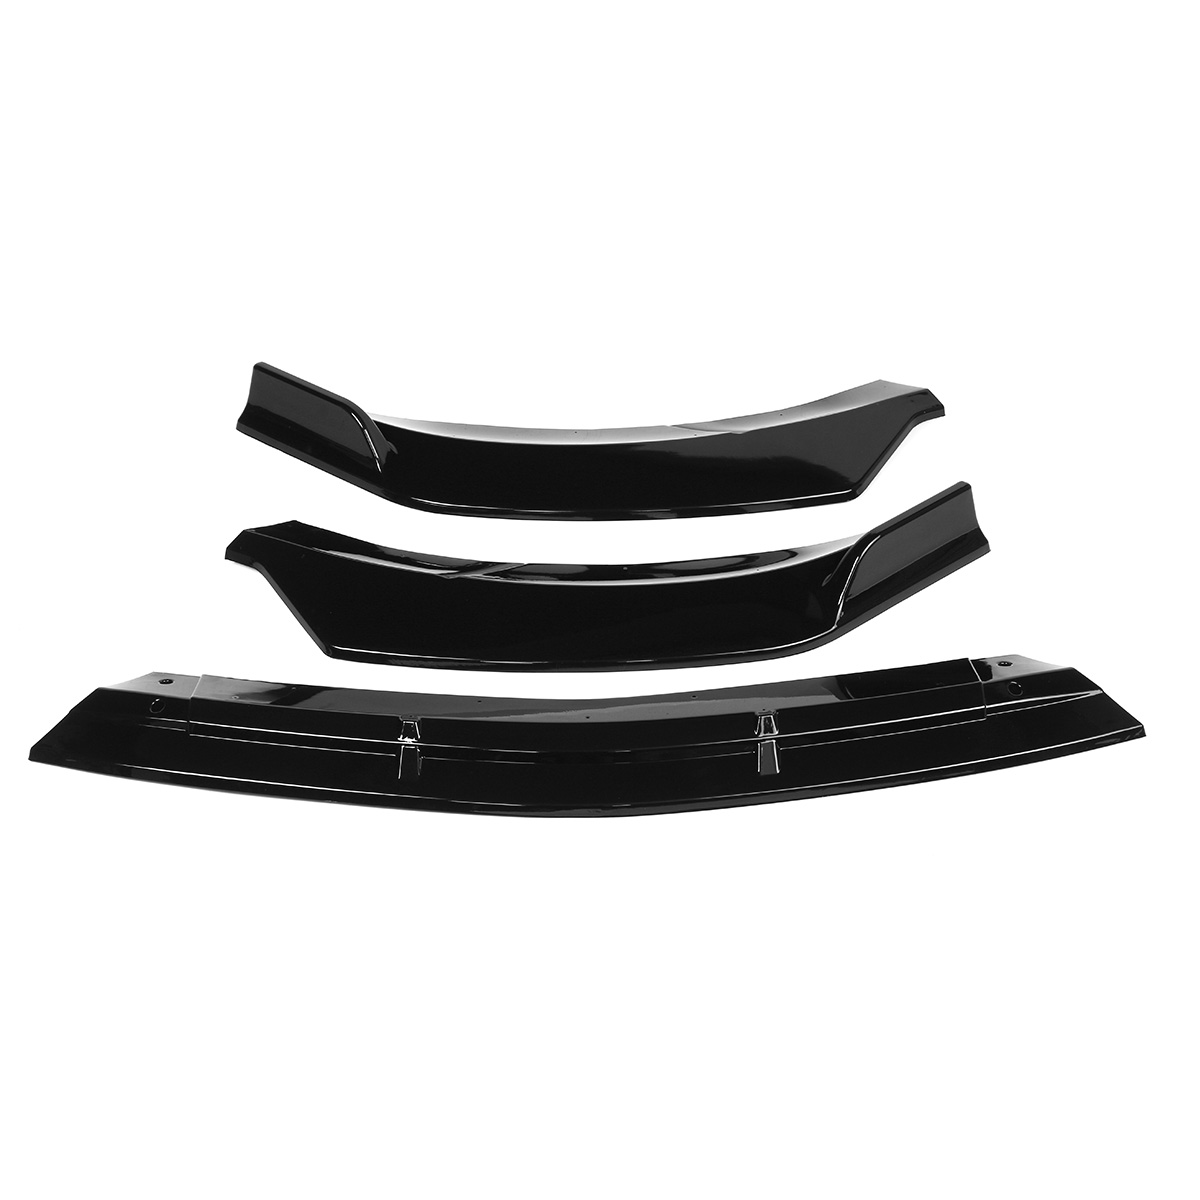 3Pcs-Glossy-Black-Front-Bumper-Protector-Lip-Spoiler-Covers-Trim-For-Mercedes-Benz-CLA-Class-W117-20-1629230